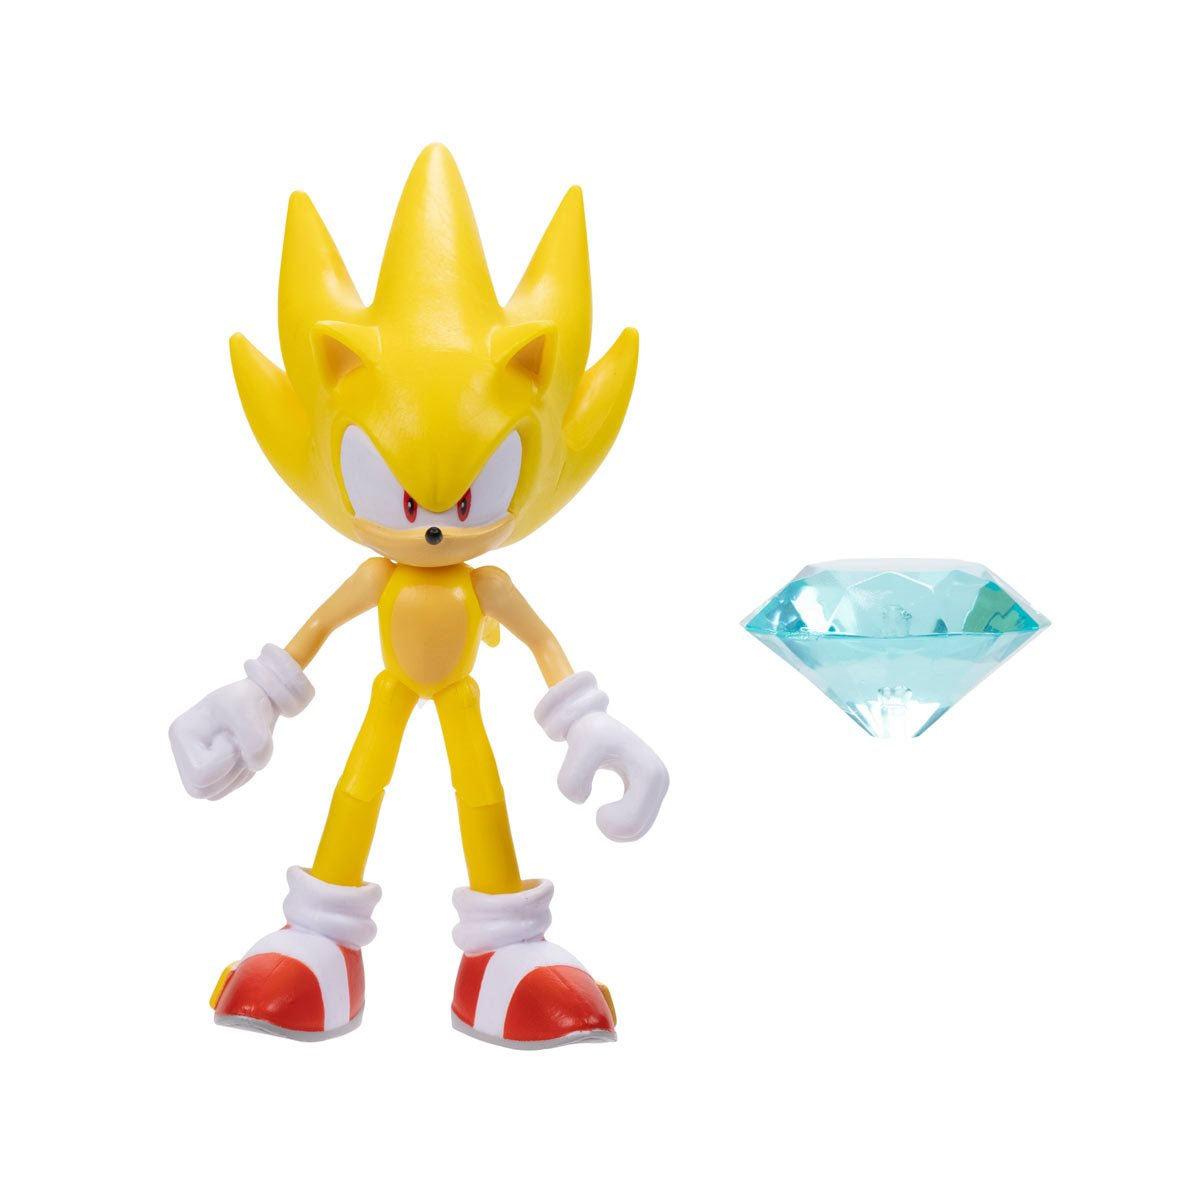 Sonic the Hedgehog 2 The Movie 4 Articulated Action Figure Collection  (Sonic)